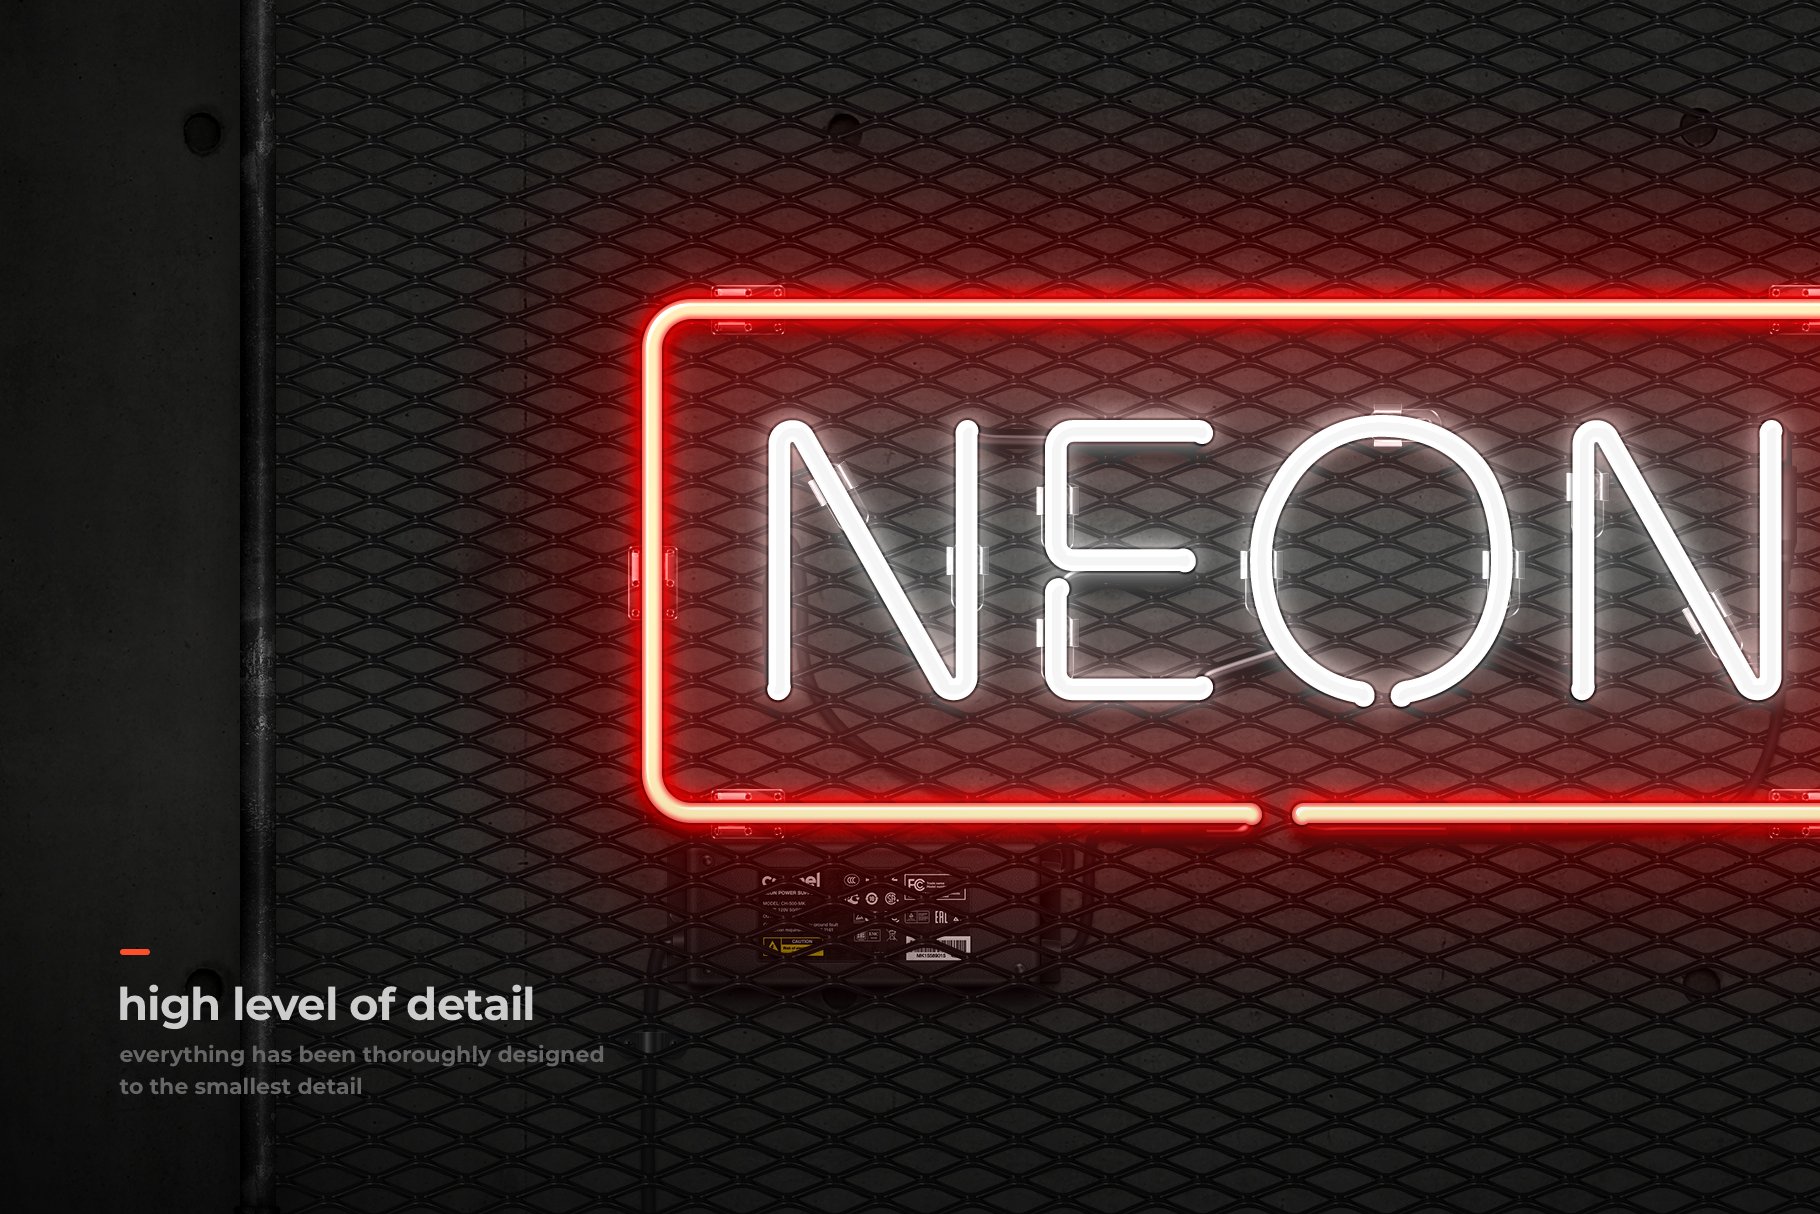 Neon Sign Kitpreview image.